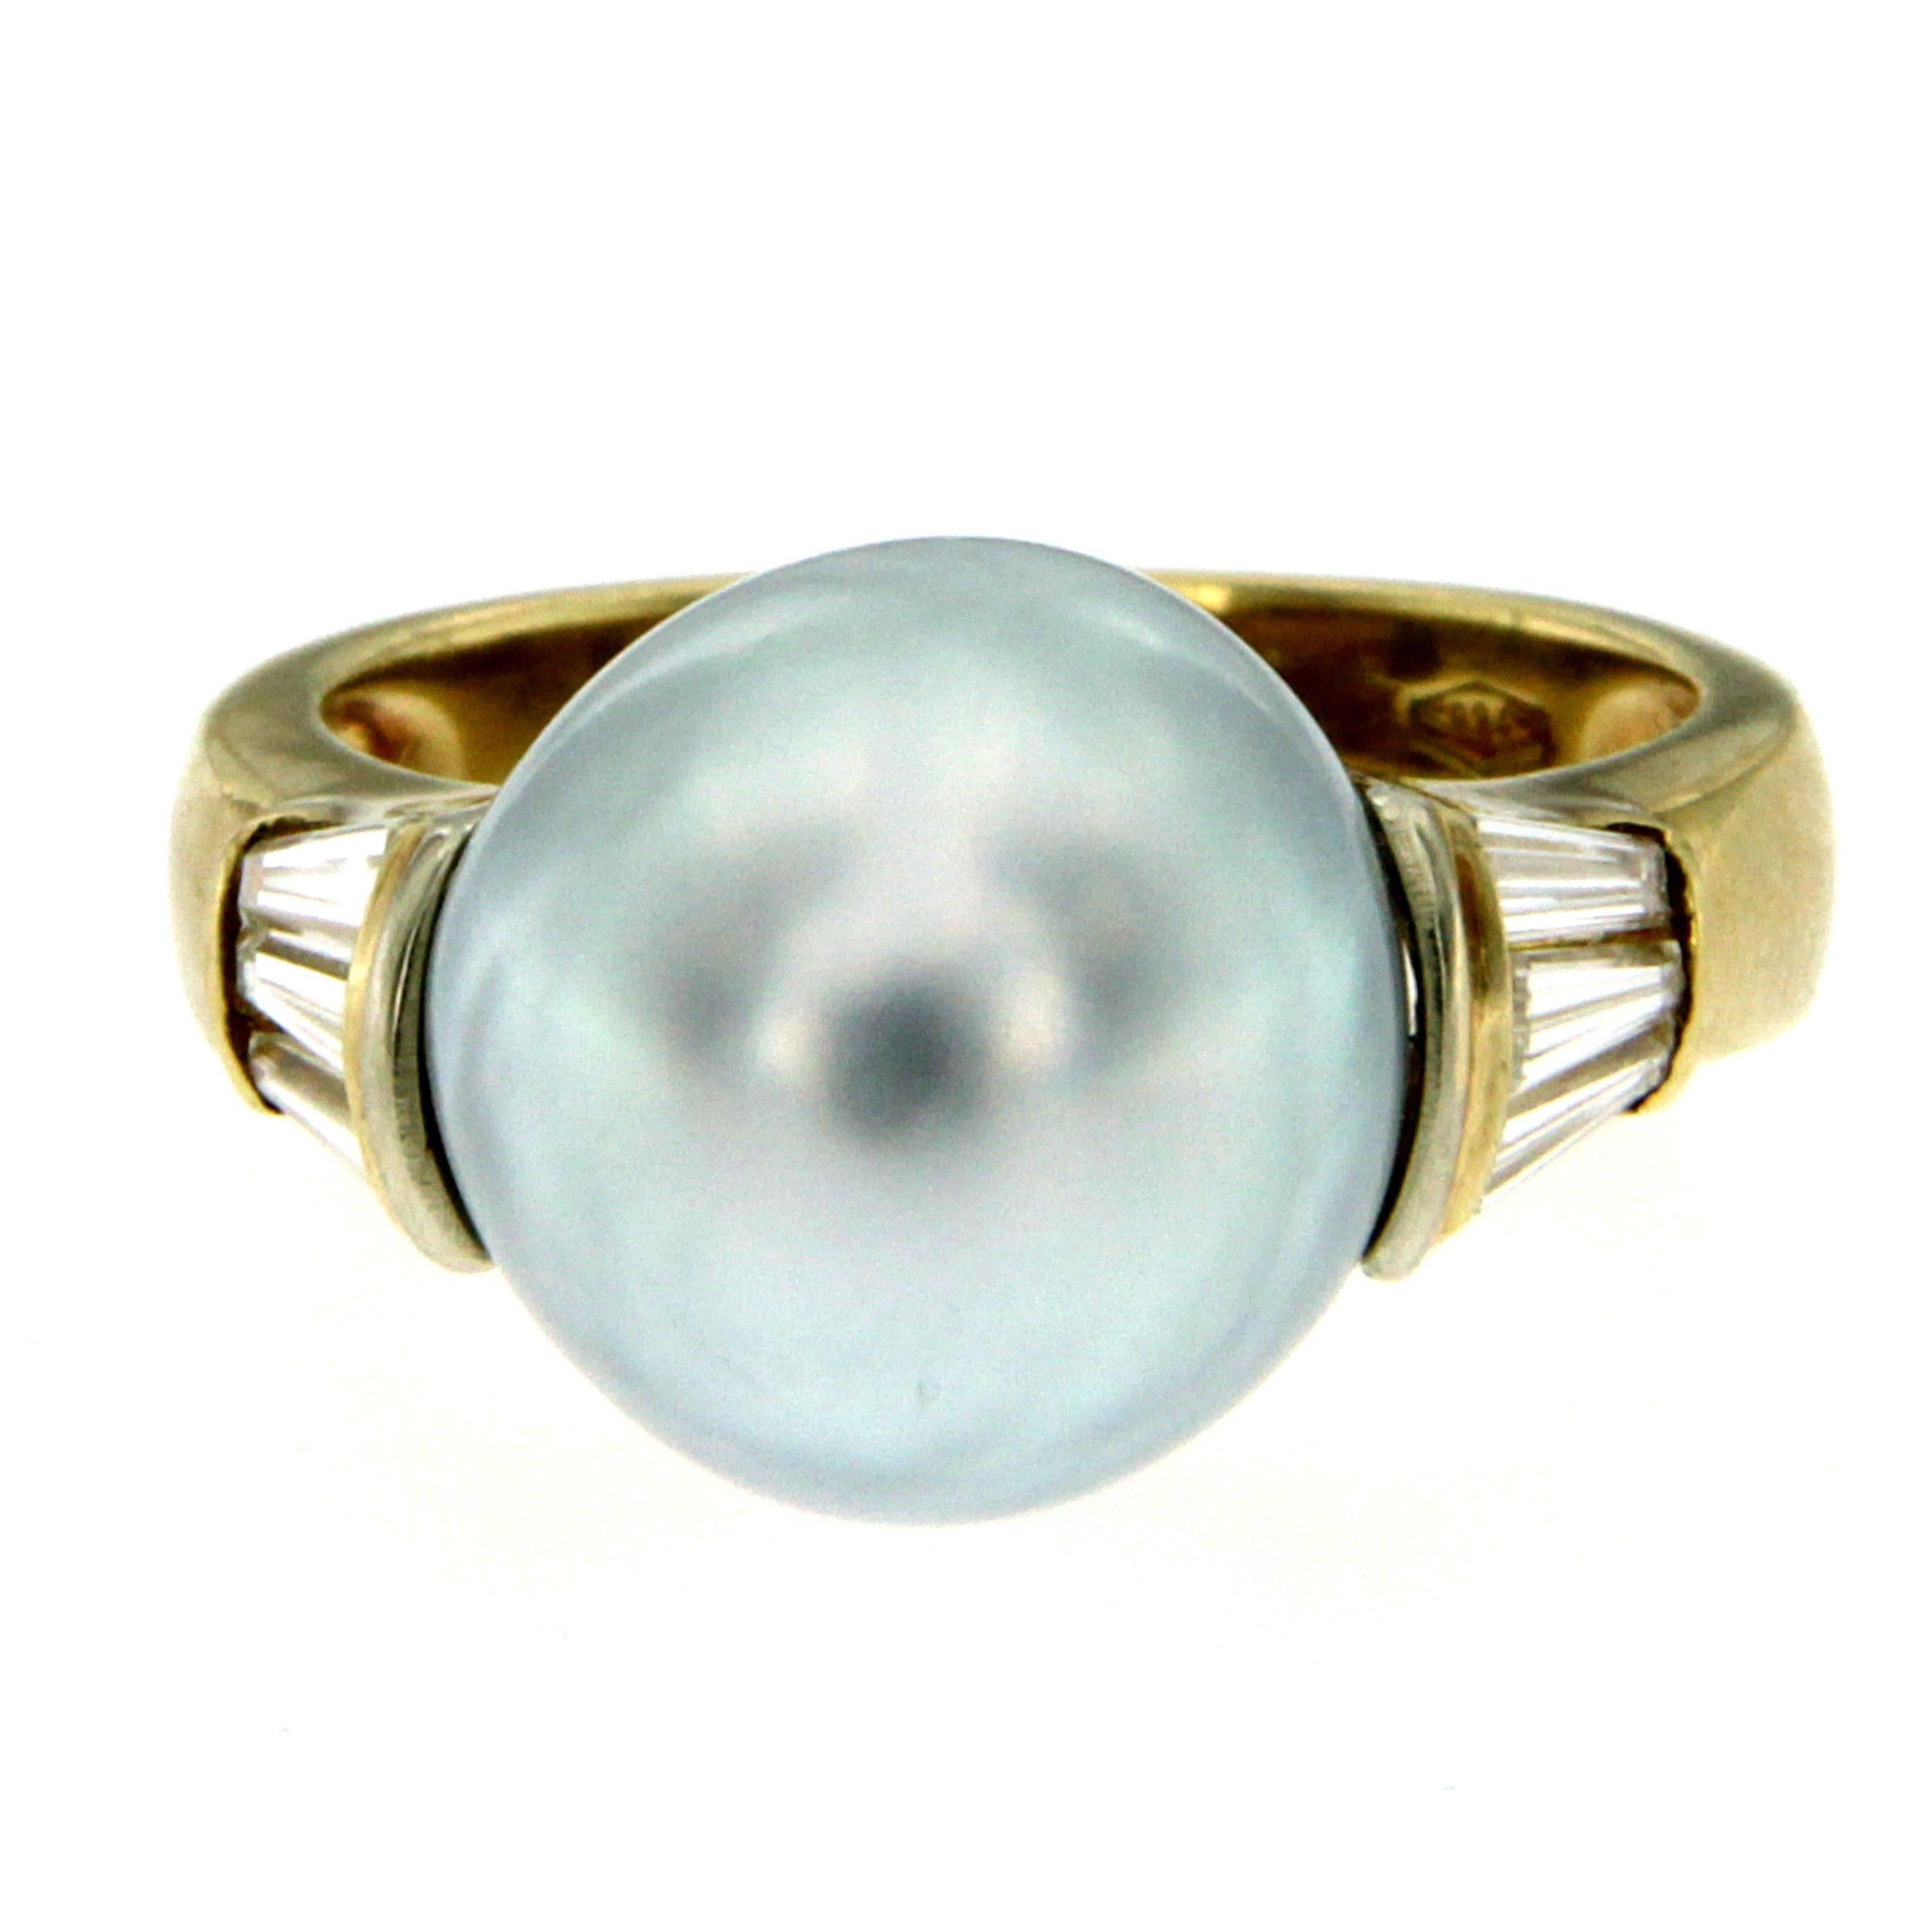 Stunning cocktail ring set in 18k yellow gold. It features a center 12 mm Great Quality South Sea Pearl framed by six tapered baguette cut diamonds for a total weight of 0,60 carat graded F color Vs clarity.
Origin Italy, circa 1980

CONDITION: